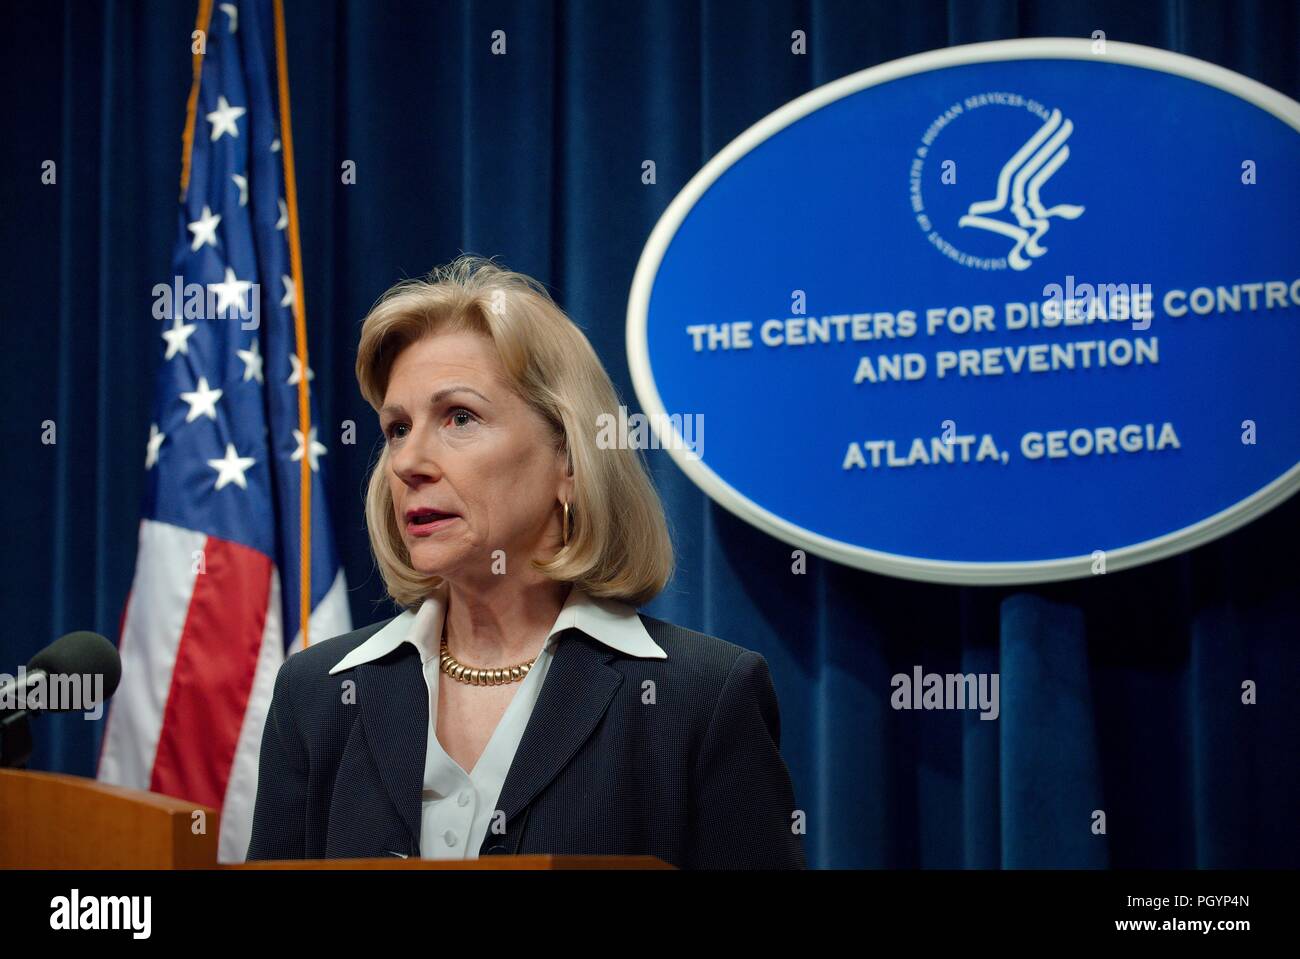 Senior press officer Bernadette Burden briefing at the Centers for Disease Control (CDC) headquarters, Atlanta, Georgia, 2009. Image courtesy Centers for Disease Control / James Gathany. () Stock Photo